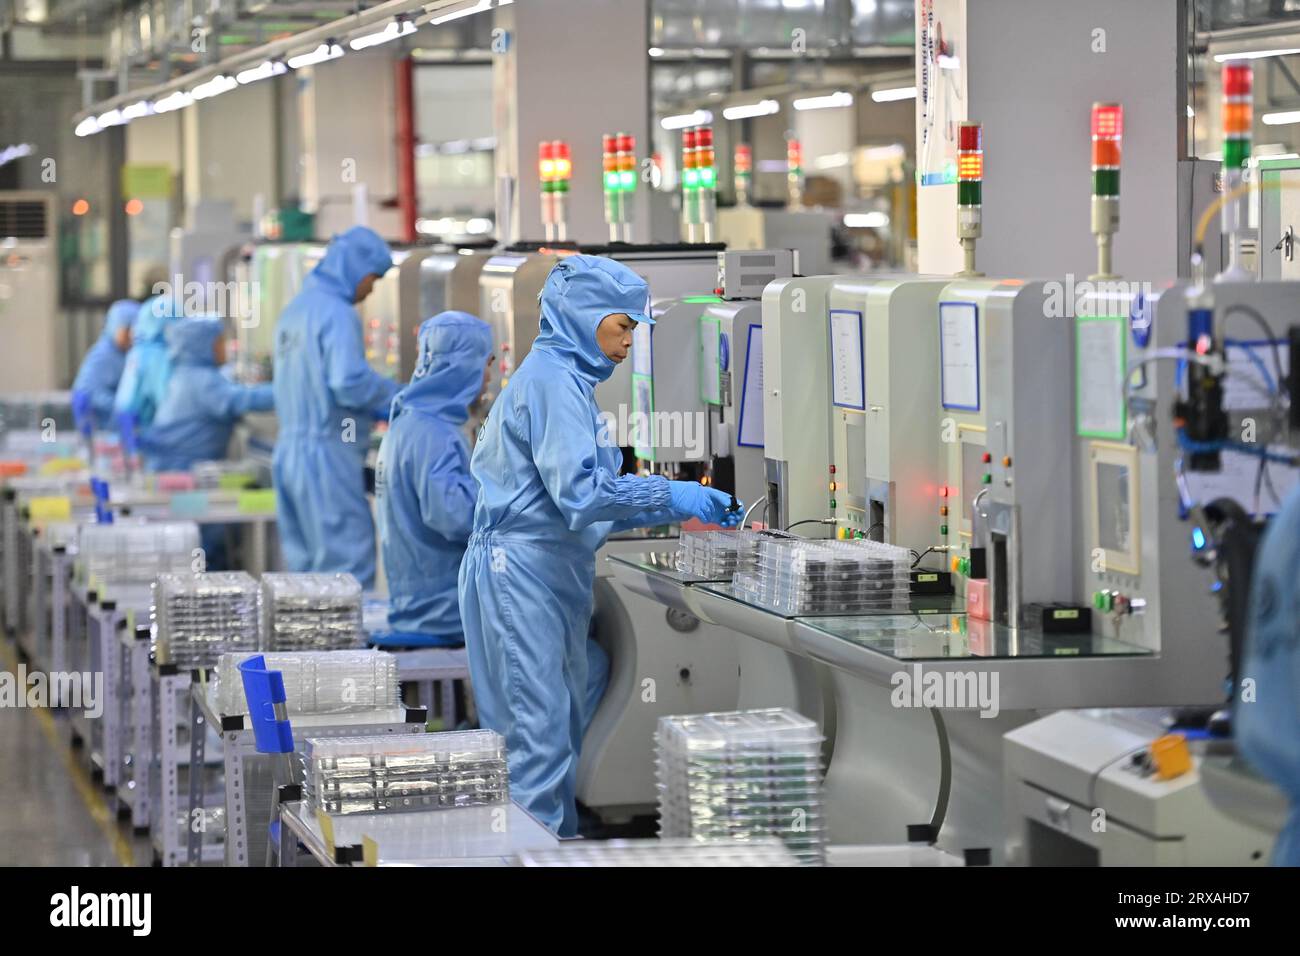 Liuzhou, China's Guangxi Zhuang Autonomous Region. 21st Sep, 2023. Employees work on a production line of Liuzhou Yuanchuang EFI Thecnology Co., Ltd. in Liuzhou City, south China's Guangxi Zhuang Autonomous Region, Sept. 21, 2023. In recent years, Liuzhou has been promoting the cultivation and expansion of emerging industries such as new-energy, intelligent equipment and smart home appliances manufacturing, biomedicine and new-generation information technology. Credit: Huang Xiaobang/Xinhua/Alamy Live News Stock Photo